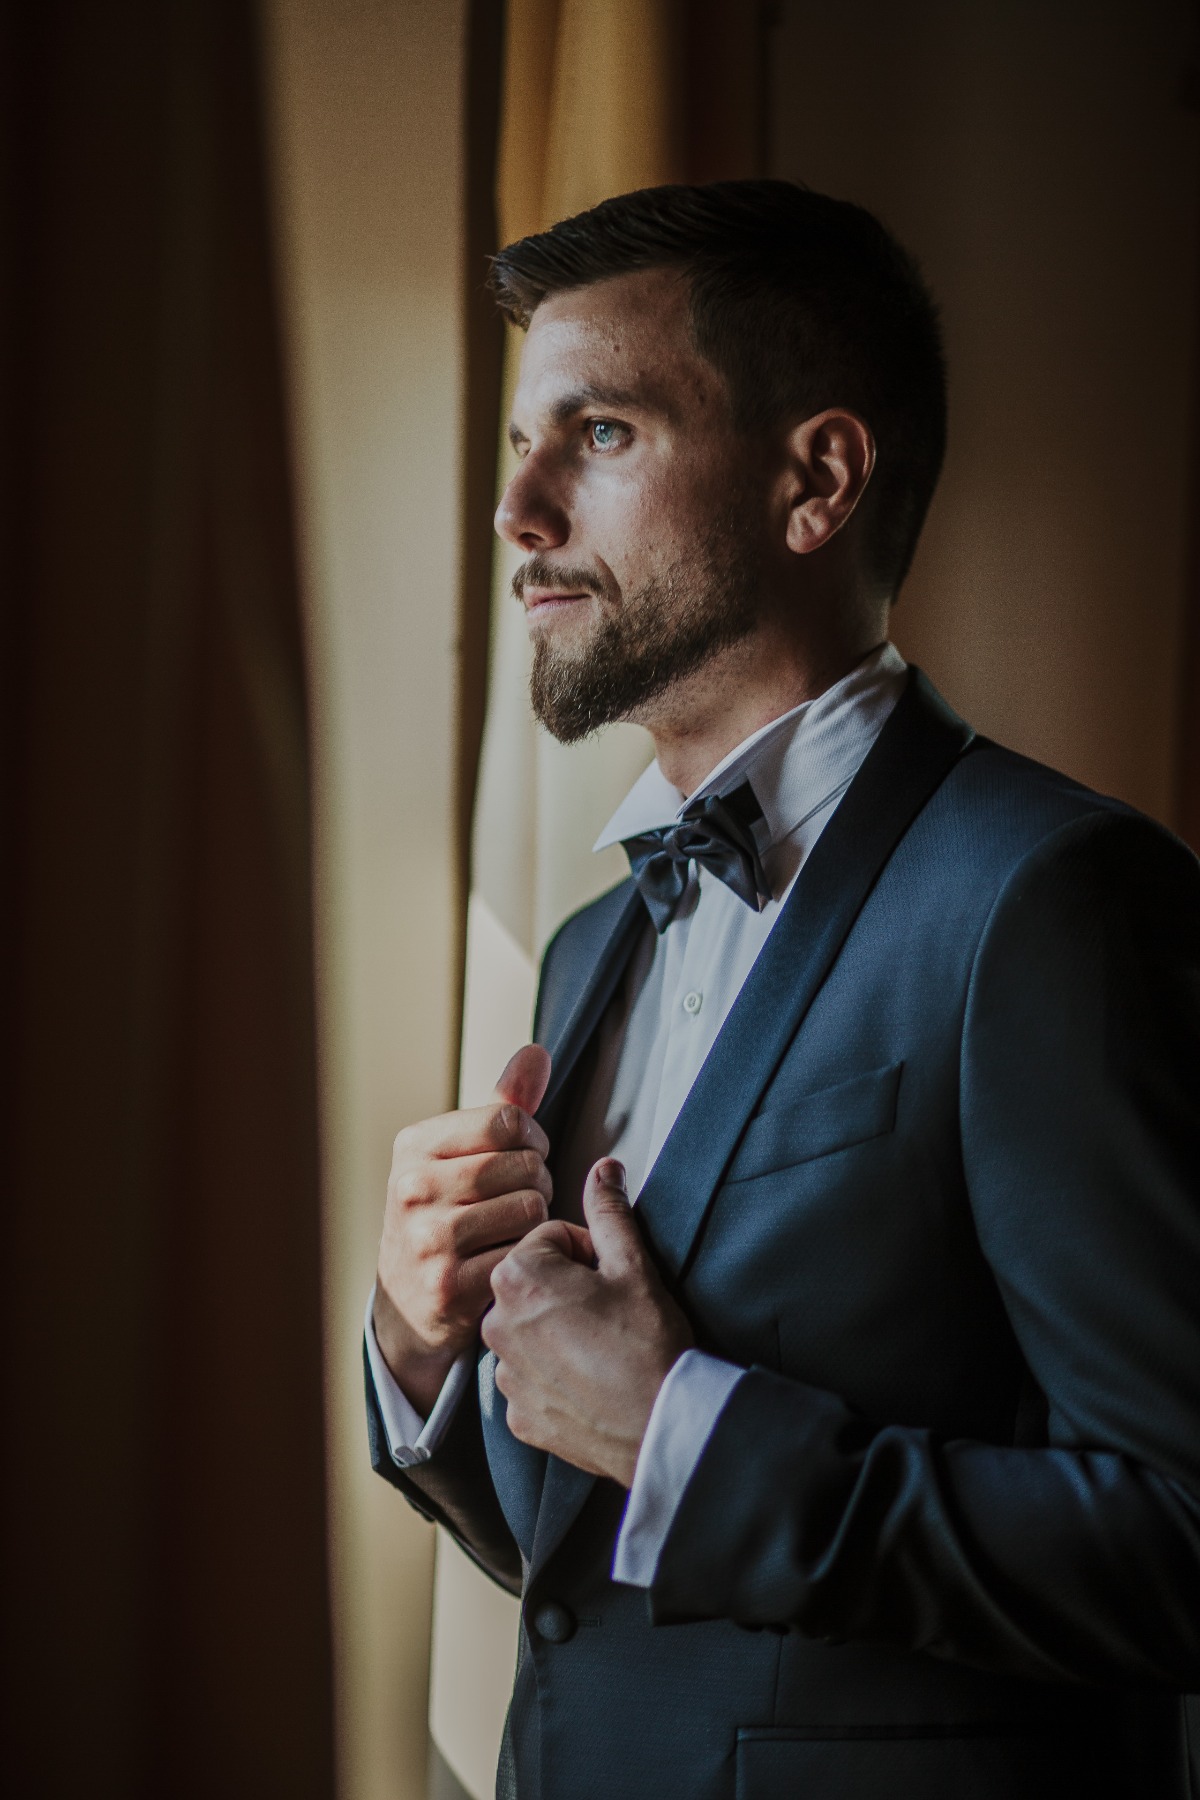 Groom in navy blue tux with black bow tie